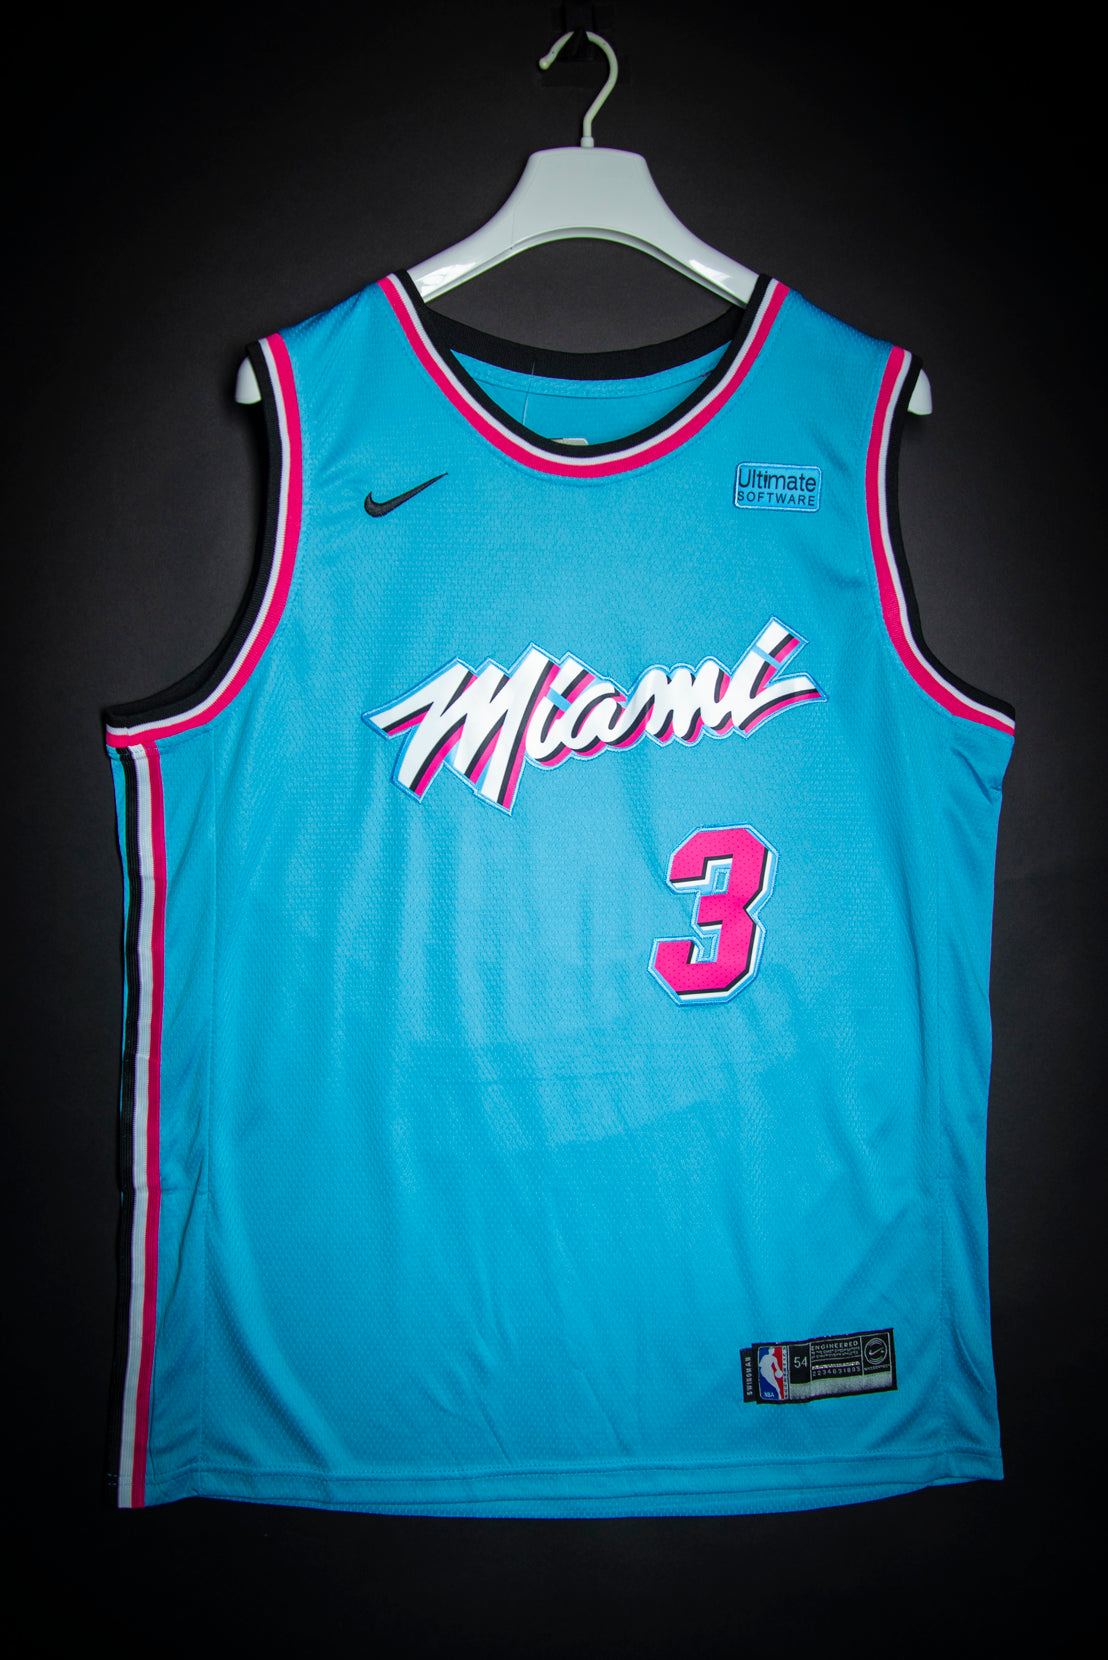 pink and blue heat jersey